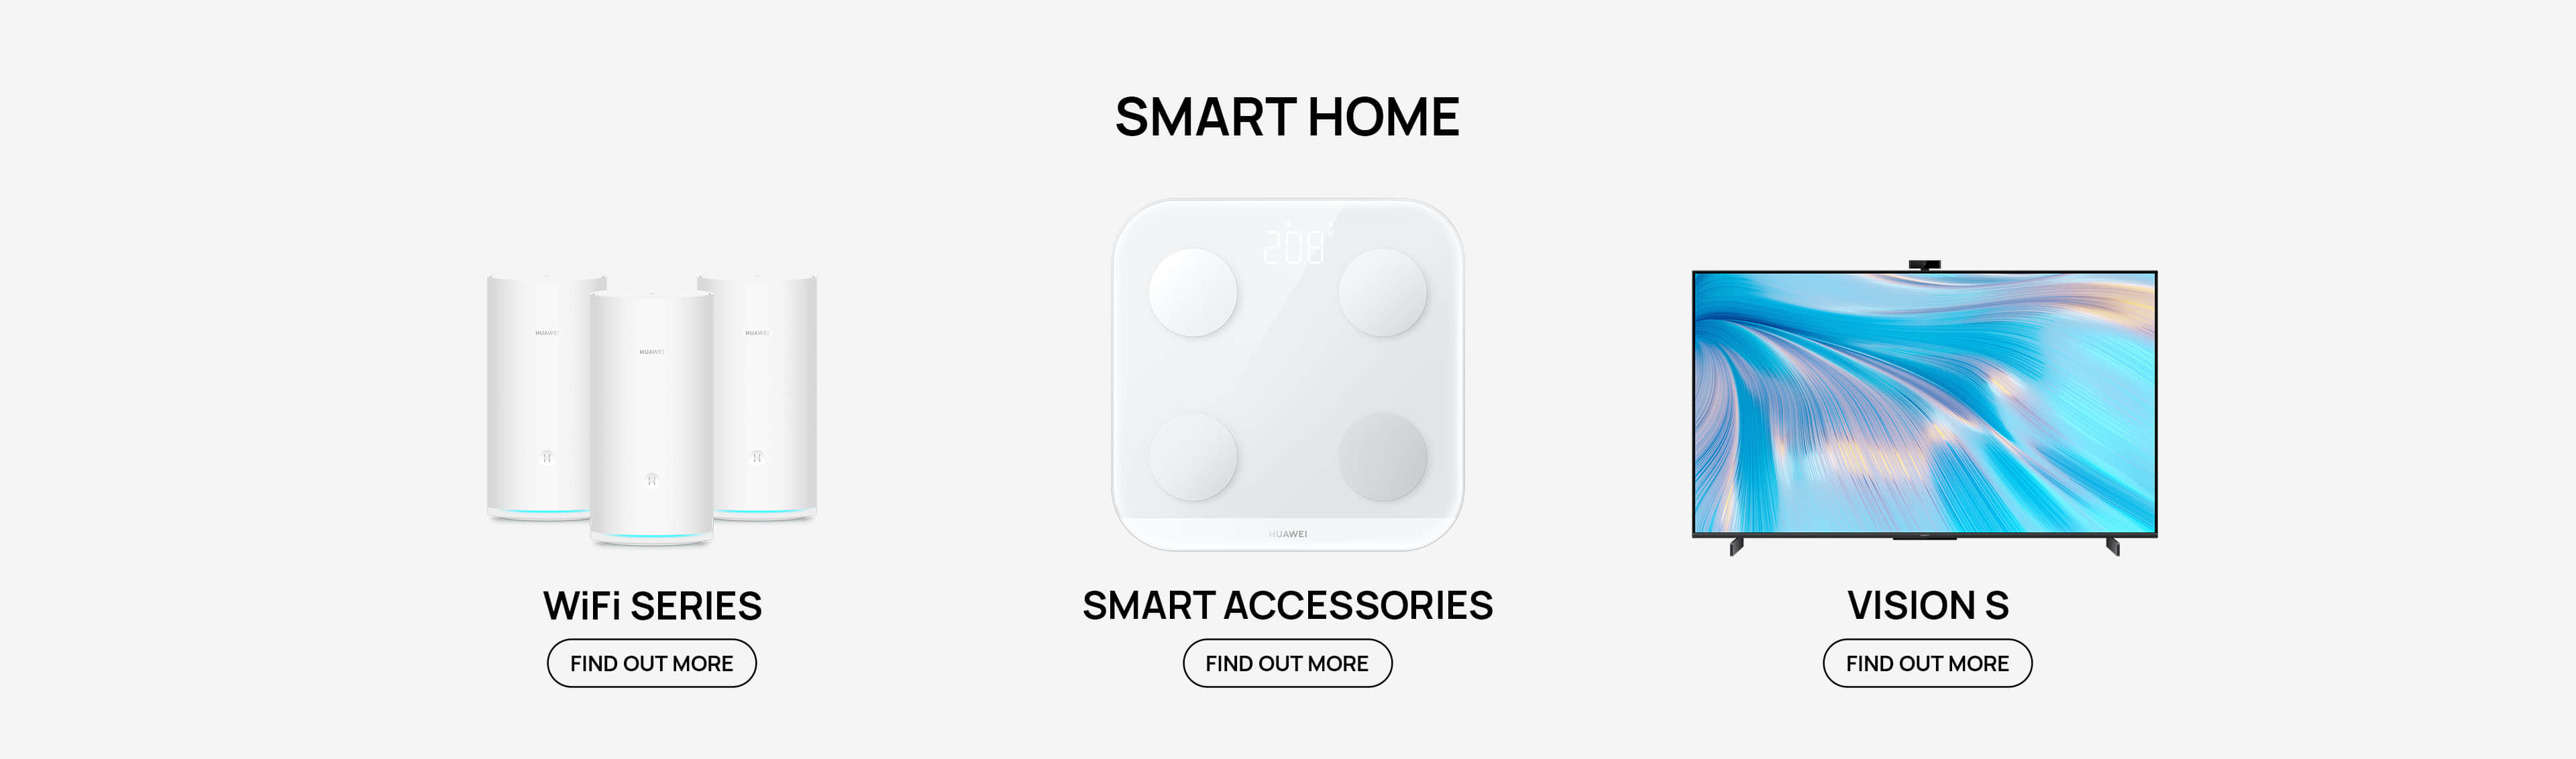 huawei-smart-products